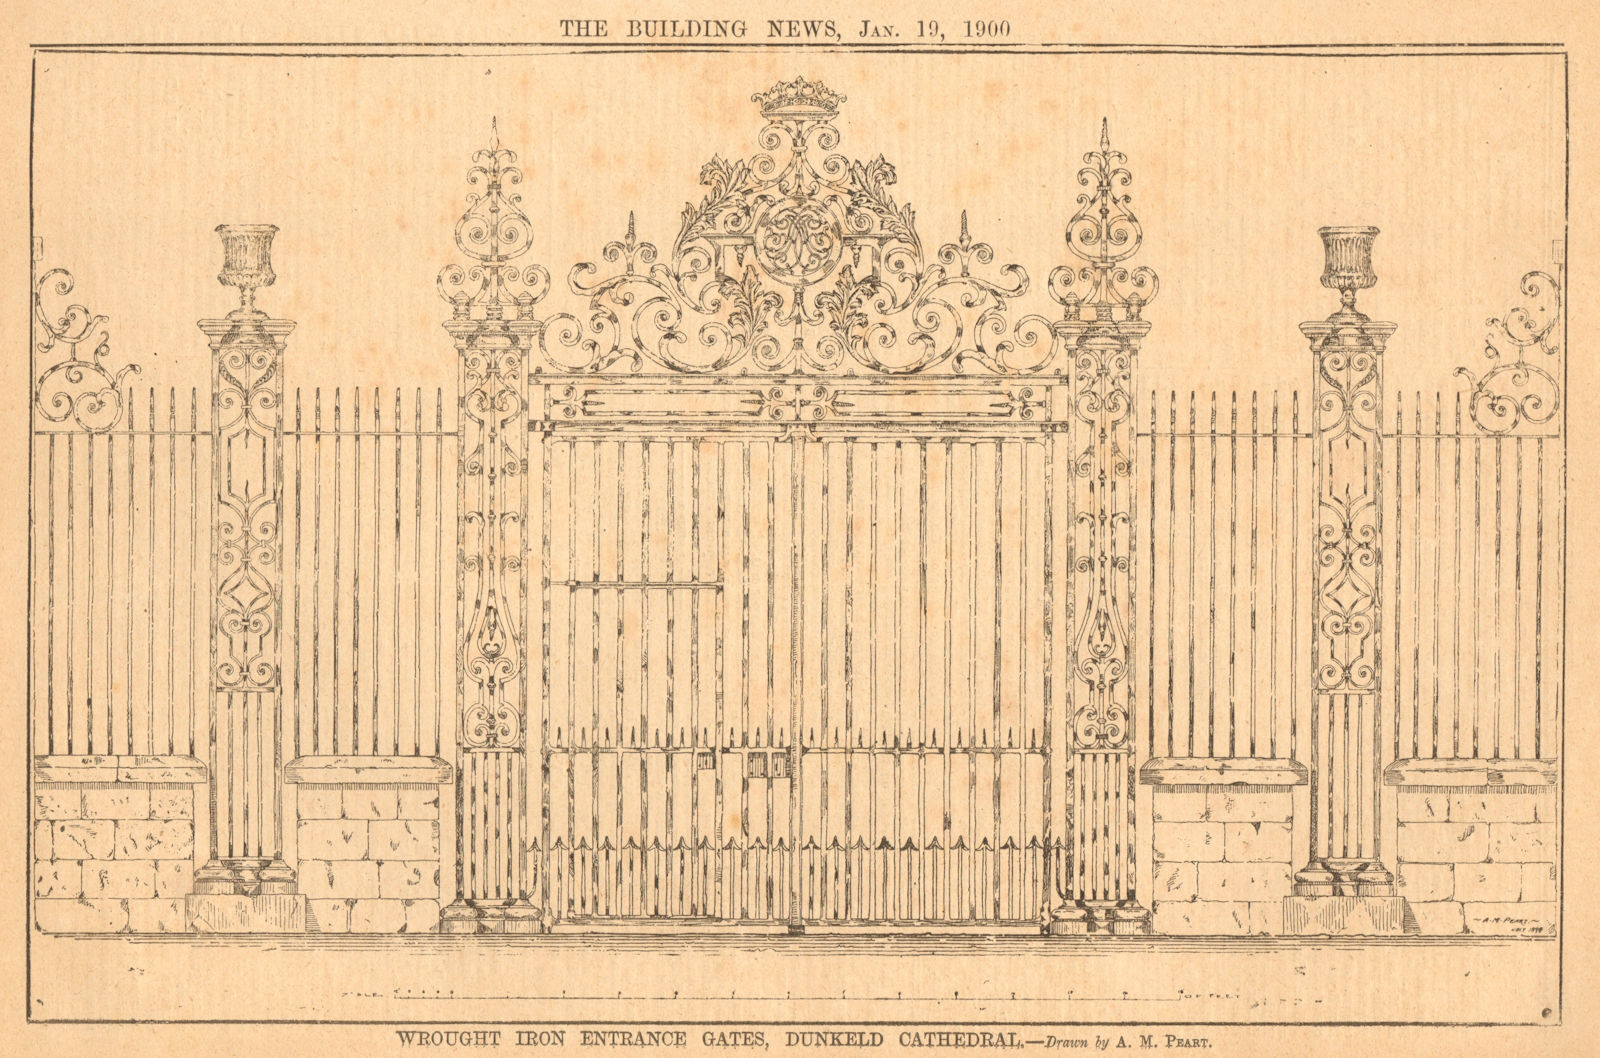 Associate Product Wrought iron entrance gates, Dunkeld Cathedral. By A.M. Peart. Scotland 1900